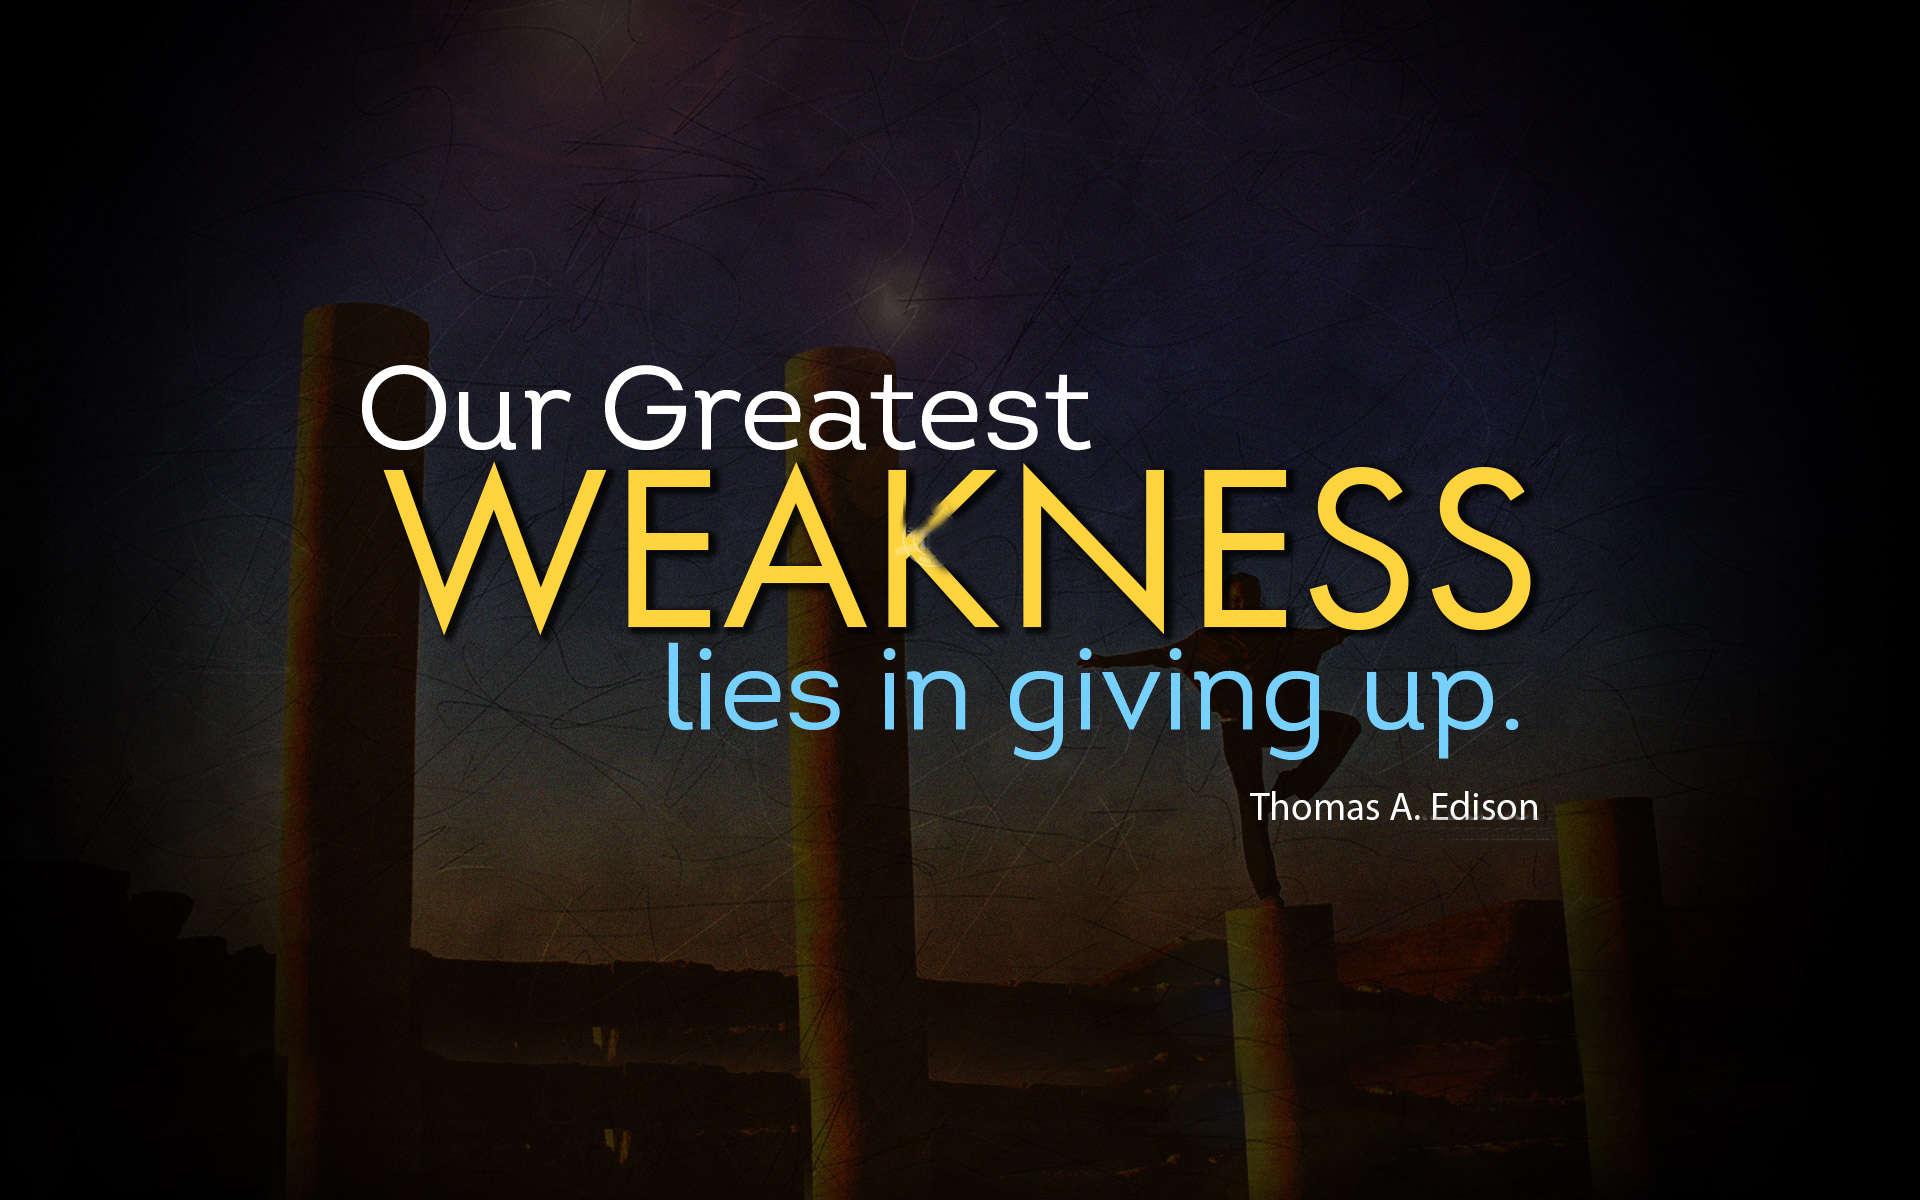 inspirational quotes high quality image android photo HD Quotes